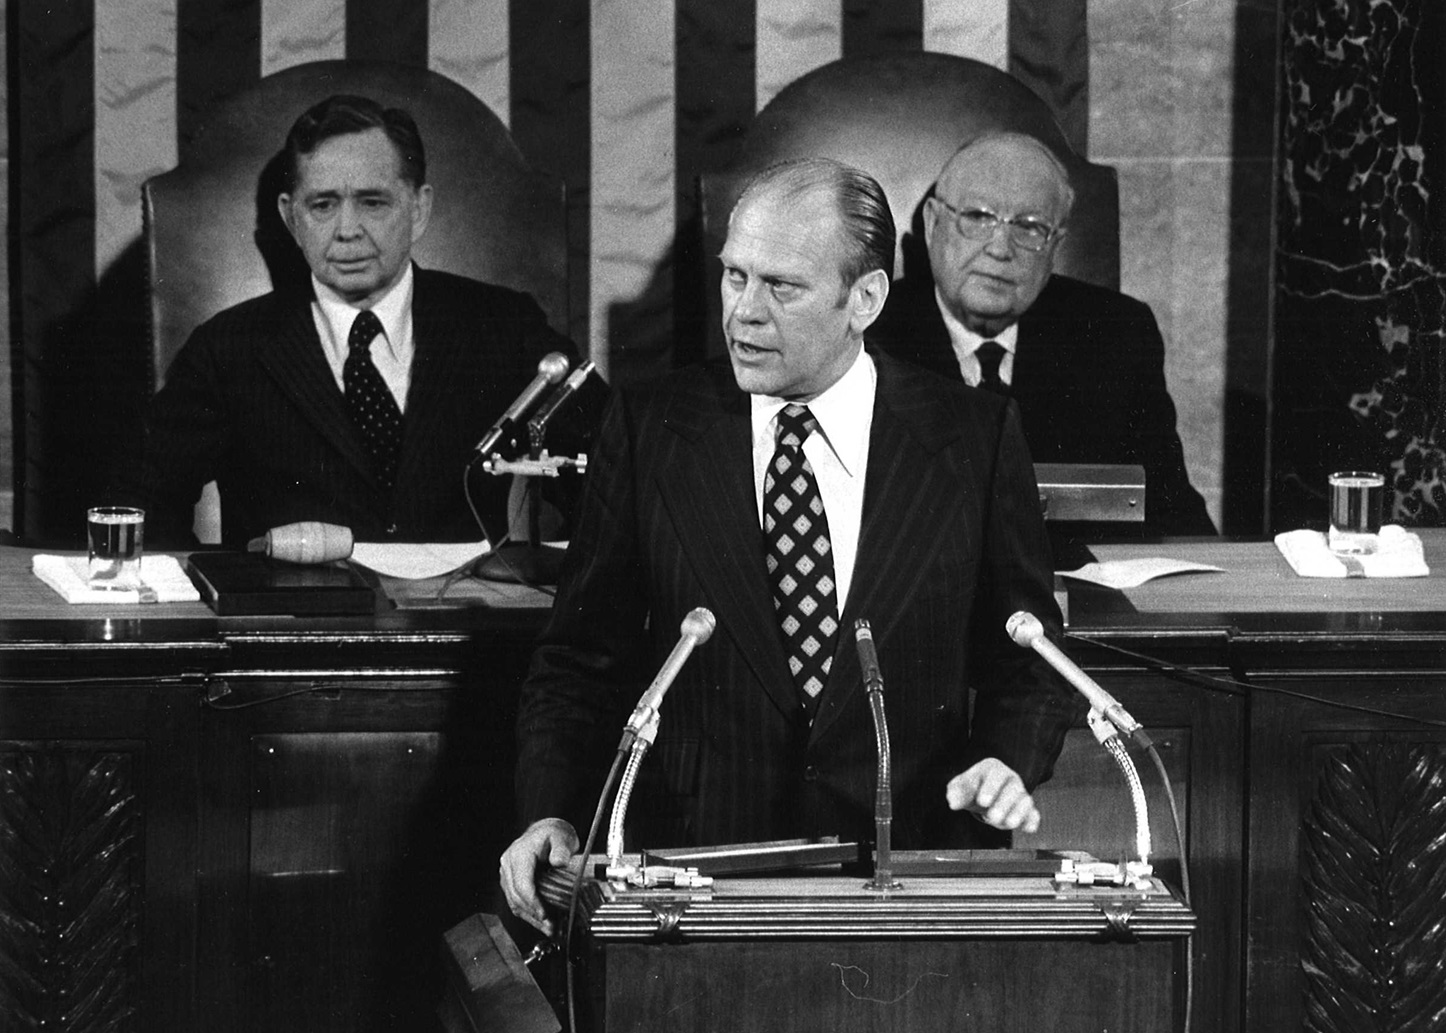 <p>President Ford declared "Our long national nightmare is over" in his 1974 inaugural address, referencing the turbulent Watergate scandal and Nixon's resignation. He hoped his would would help rebuild faith in the government. The quote was pivotal, marking the start of a new era of transparency in American politics.</p>